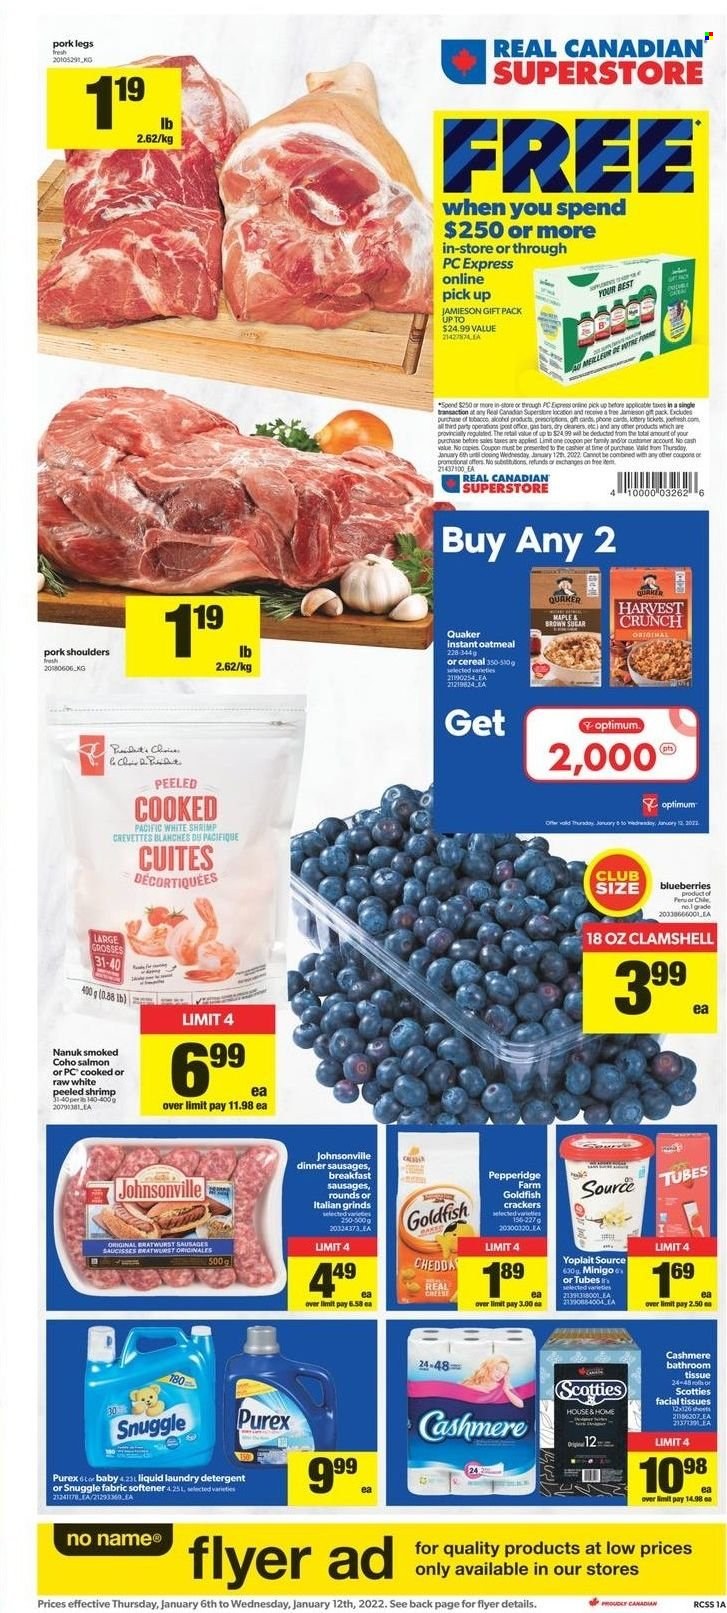 thumbnail - Real Canadian Superstore Flyer - January 06, 2022 - January 12, 2022 - Sales products - blueberries, salmon, No Name, Quaker, Johnsonville, sausage, Yoplait, crackers, Goldfish, oatmeal, alcohol, bath tissue, Snuggle, fabric softener, laundry detergent, Purex, facial tissues, Optimum, detergent. Page 1.